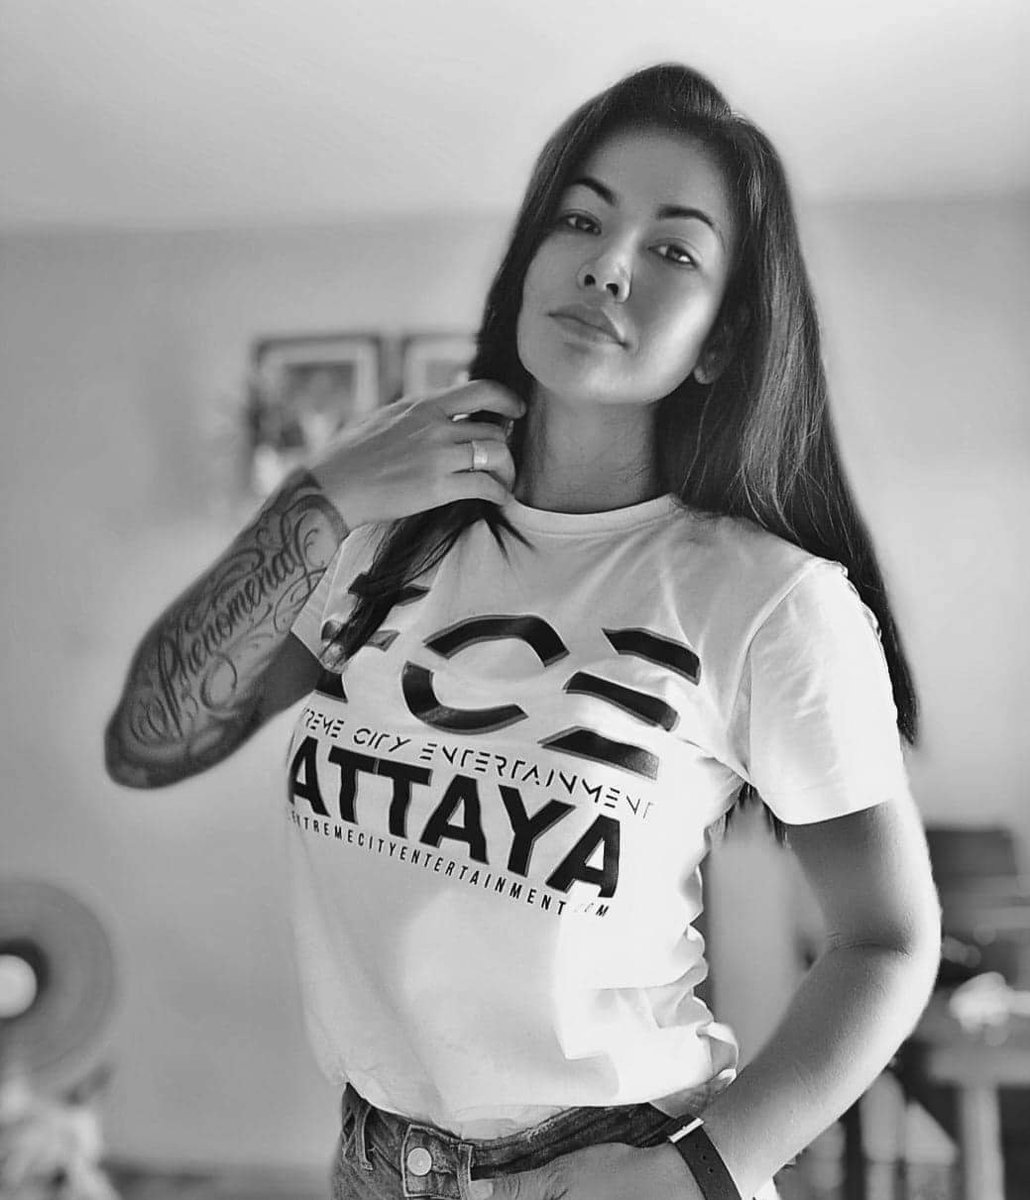 Keep sending us your awesome 😎 Selfies with our shirts and we'll keep posting them🙏💥 thanks for the love and support 💕

#pattaya #myfavoriteshirt #branding #pattayacity #thailand #fashionvibes #streetwear #skatesurfing #skatergirl #thaigirl #thaistyle